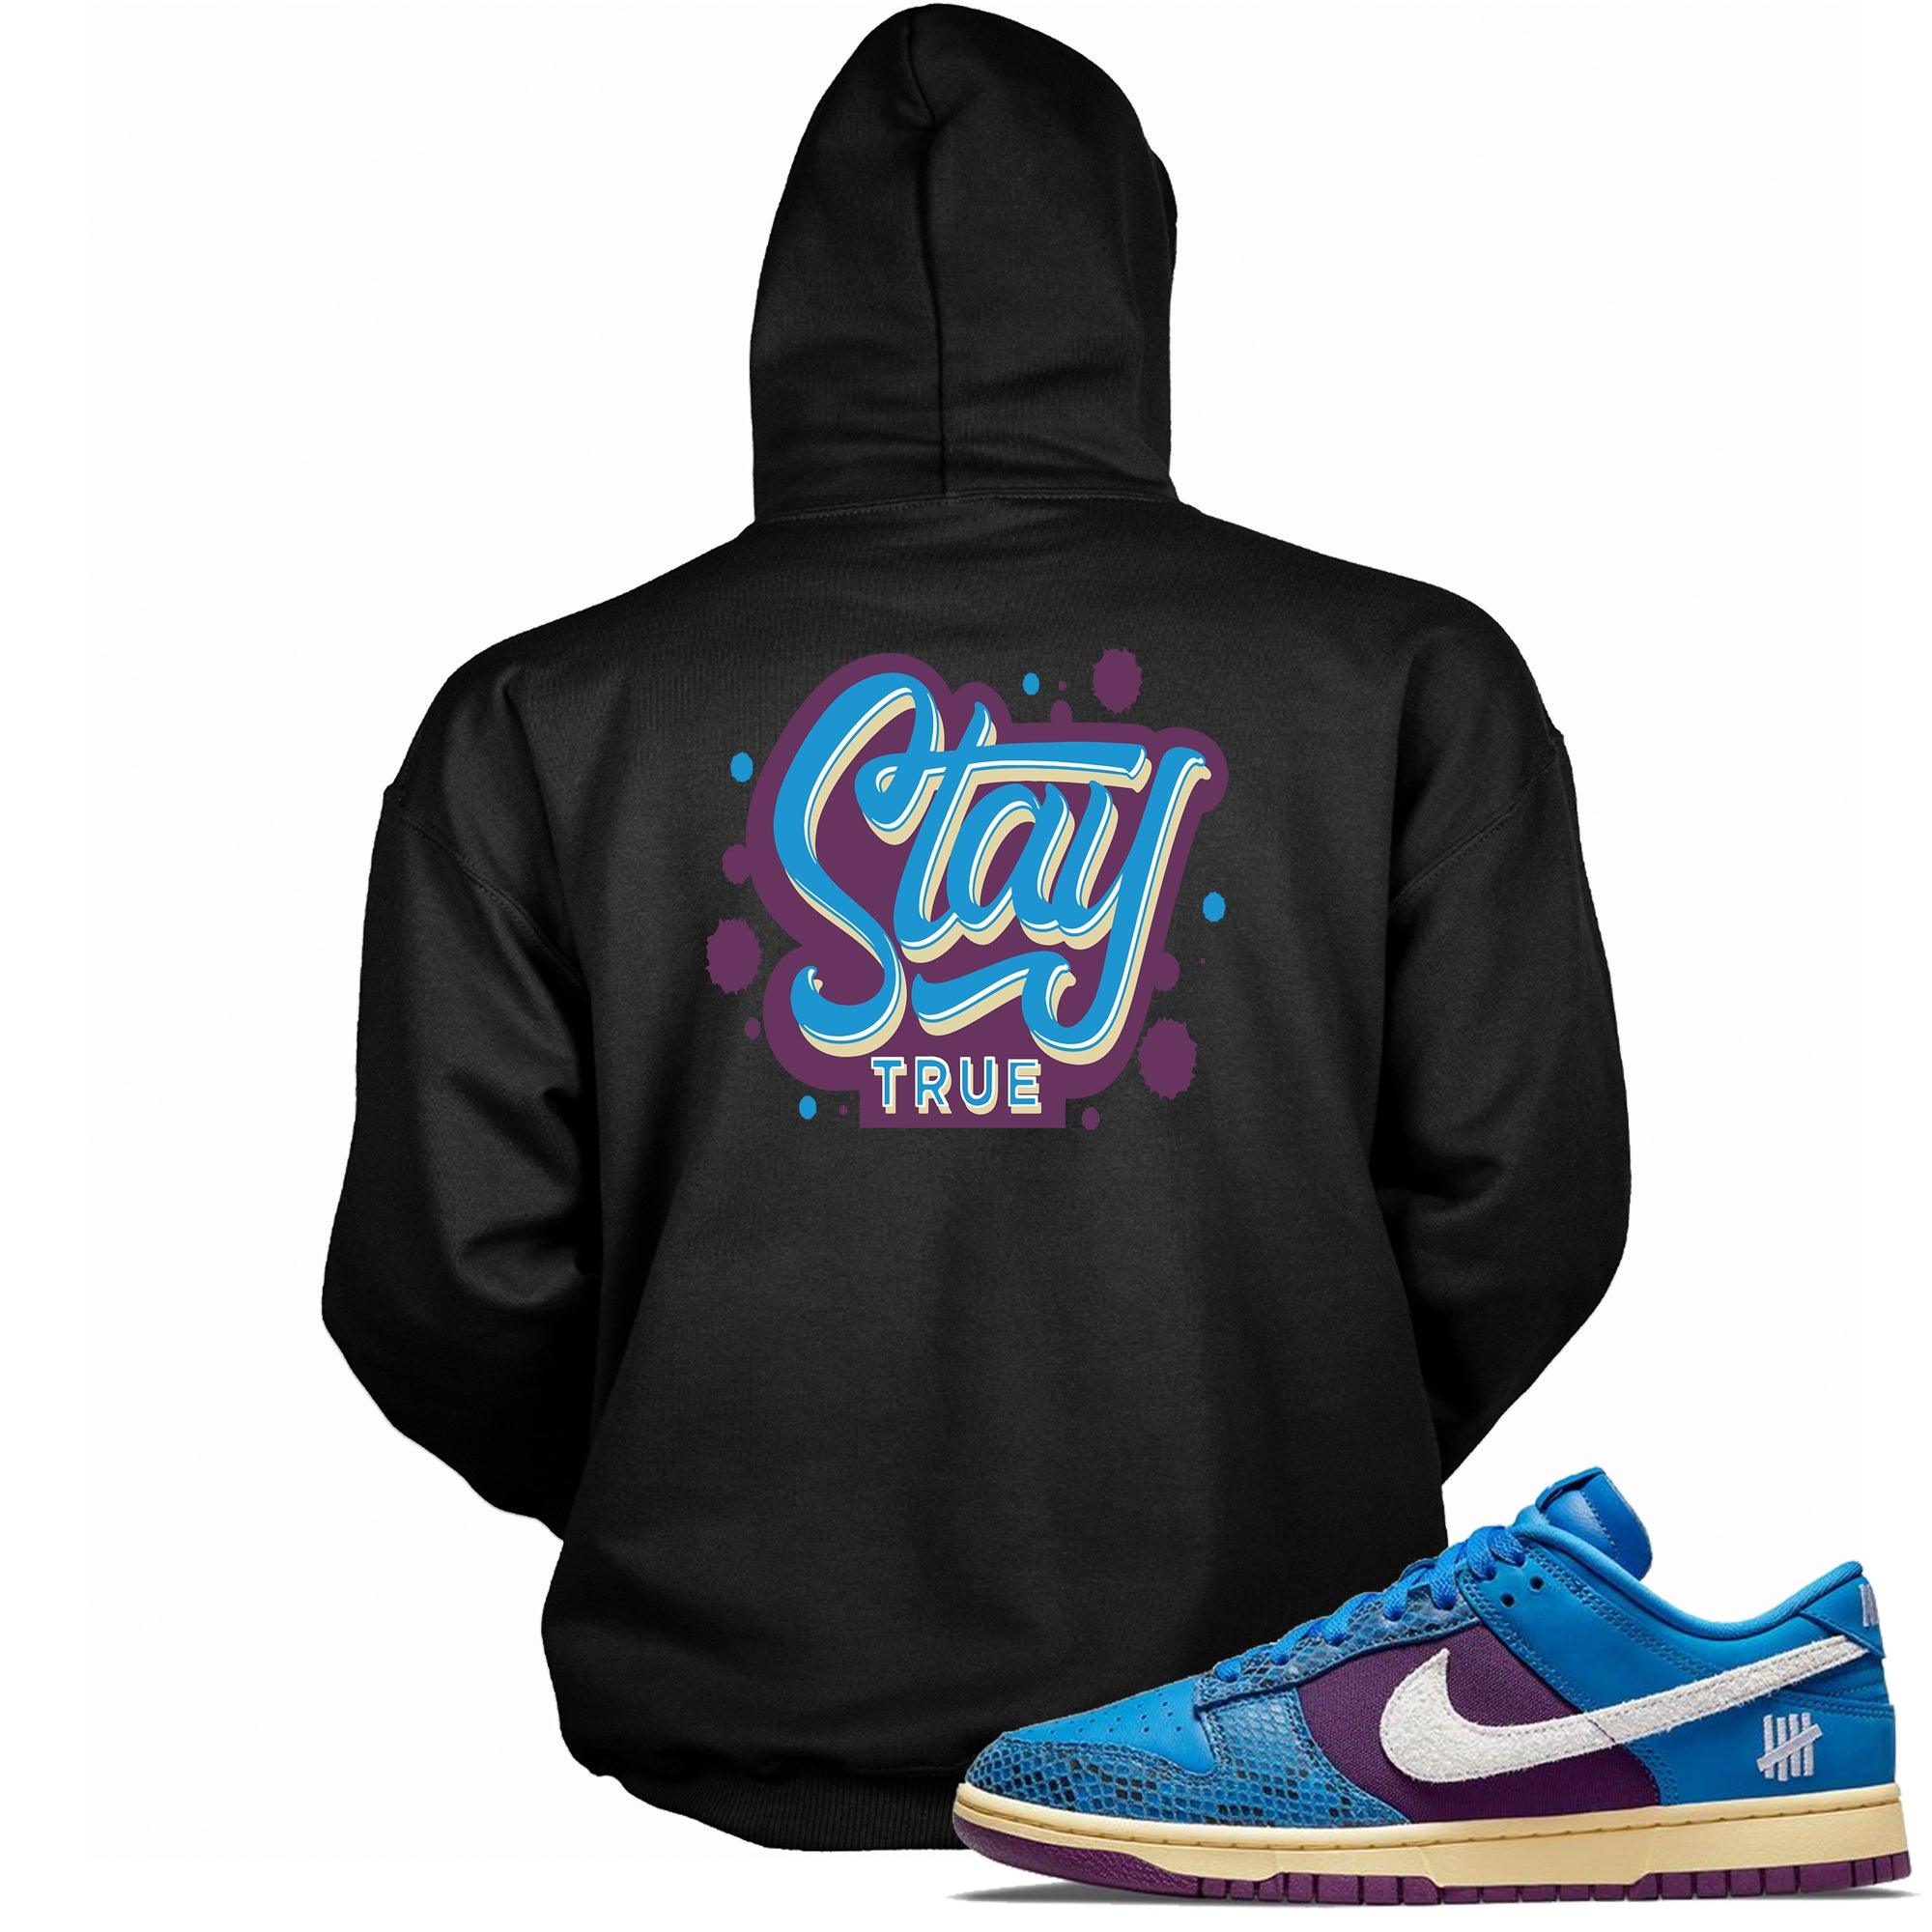 Stay True Hoodie Nike Dunk Low Undefeated 5 On It Dunk vs AF1 Sneakers photo